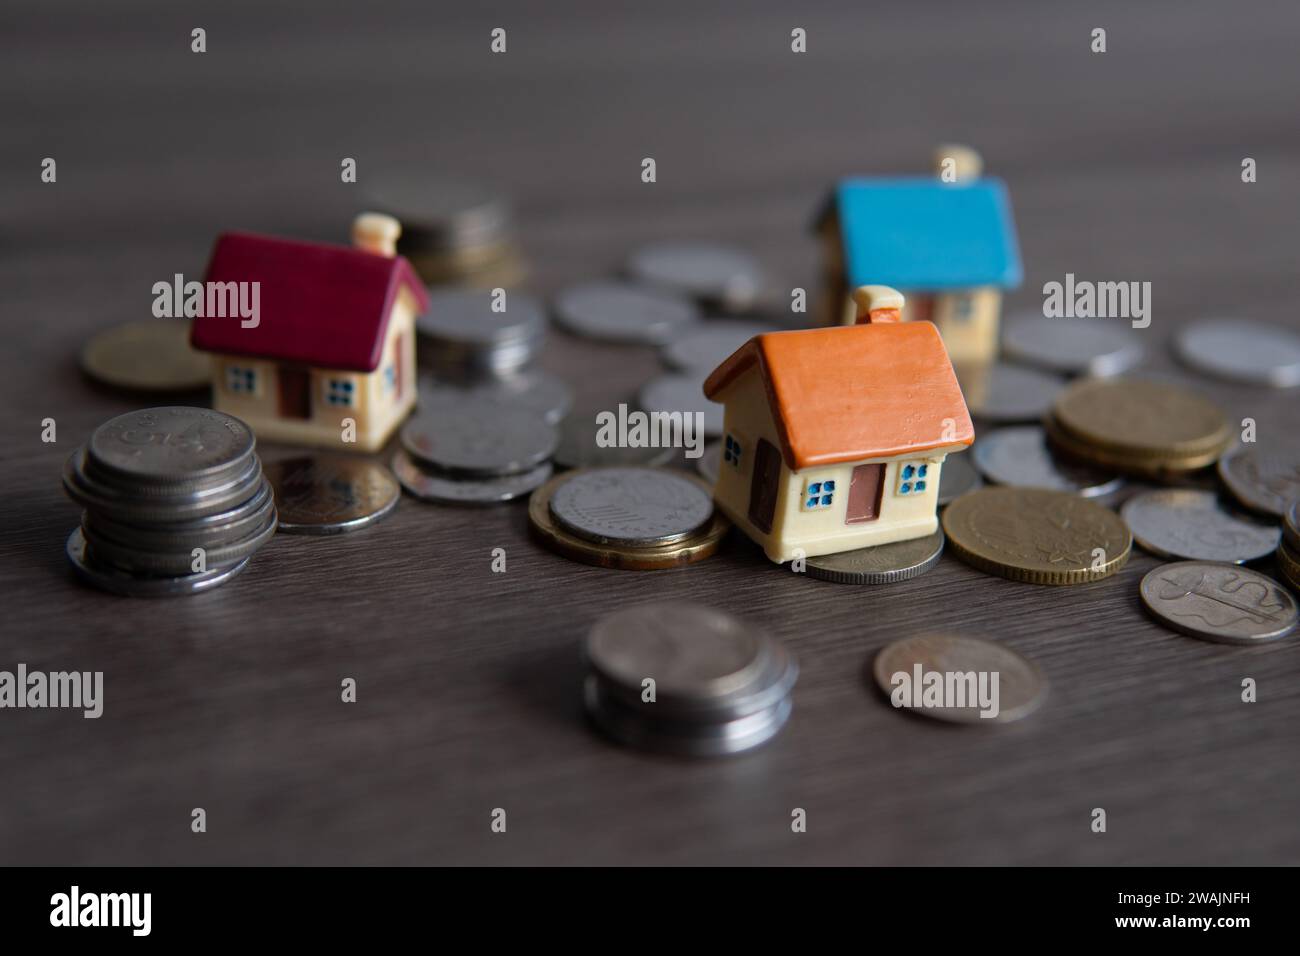 Closeup image of toy house surrounded by coins. Copy space for text. Home ownership concept. Stock Photo